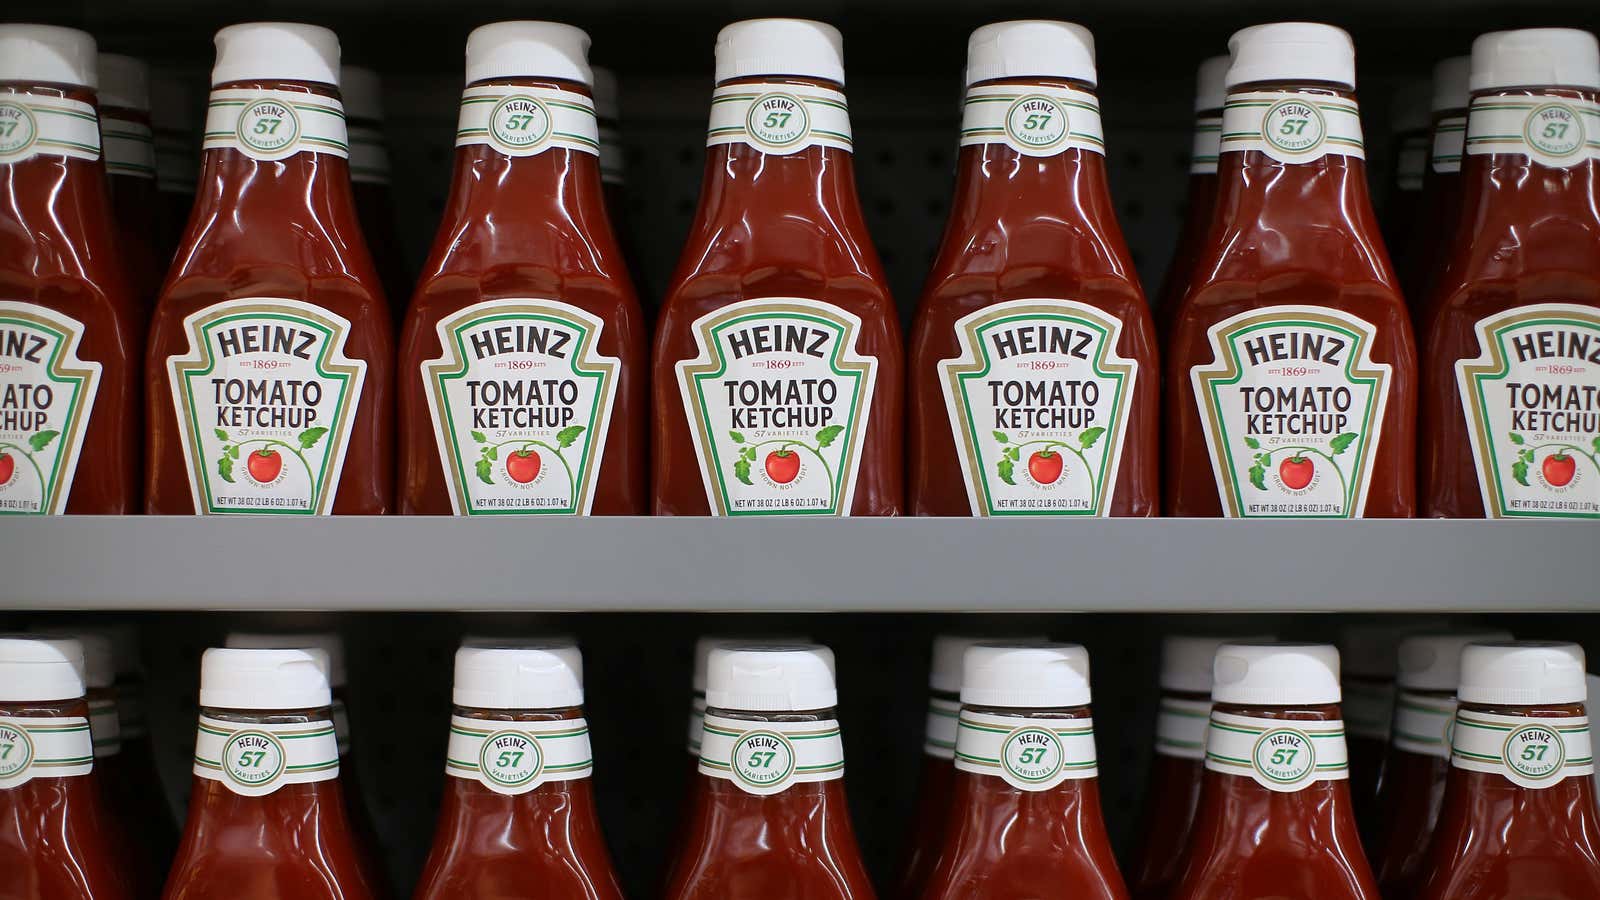 Not everything at Heinz moves slowly.